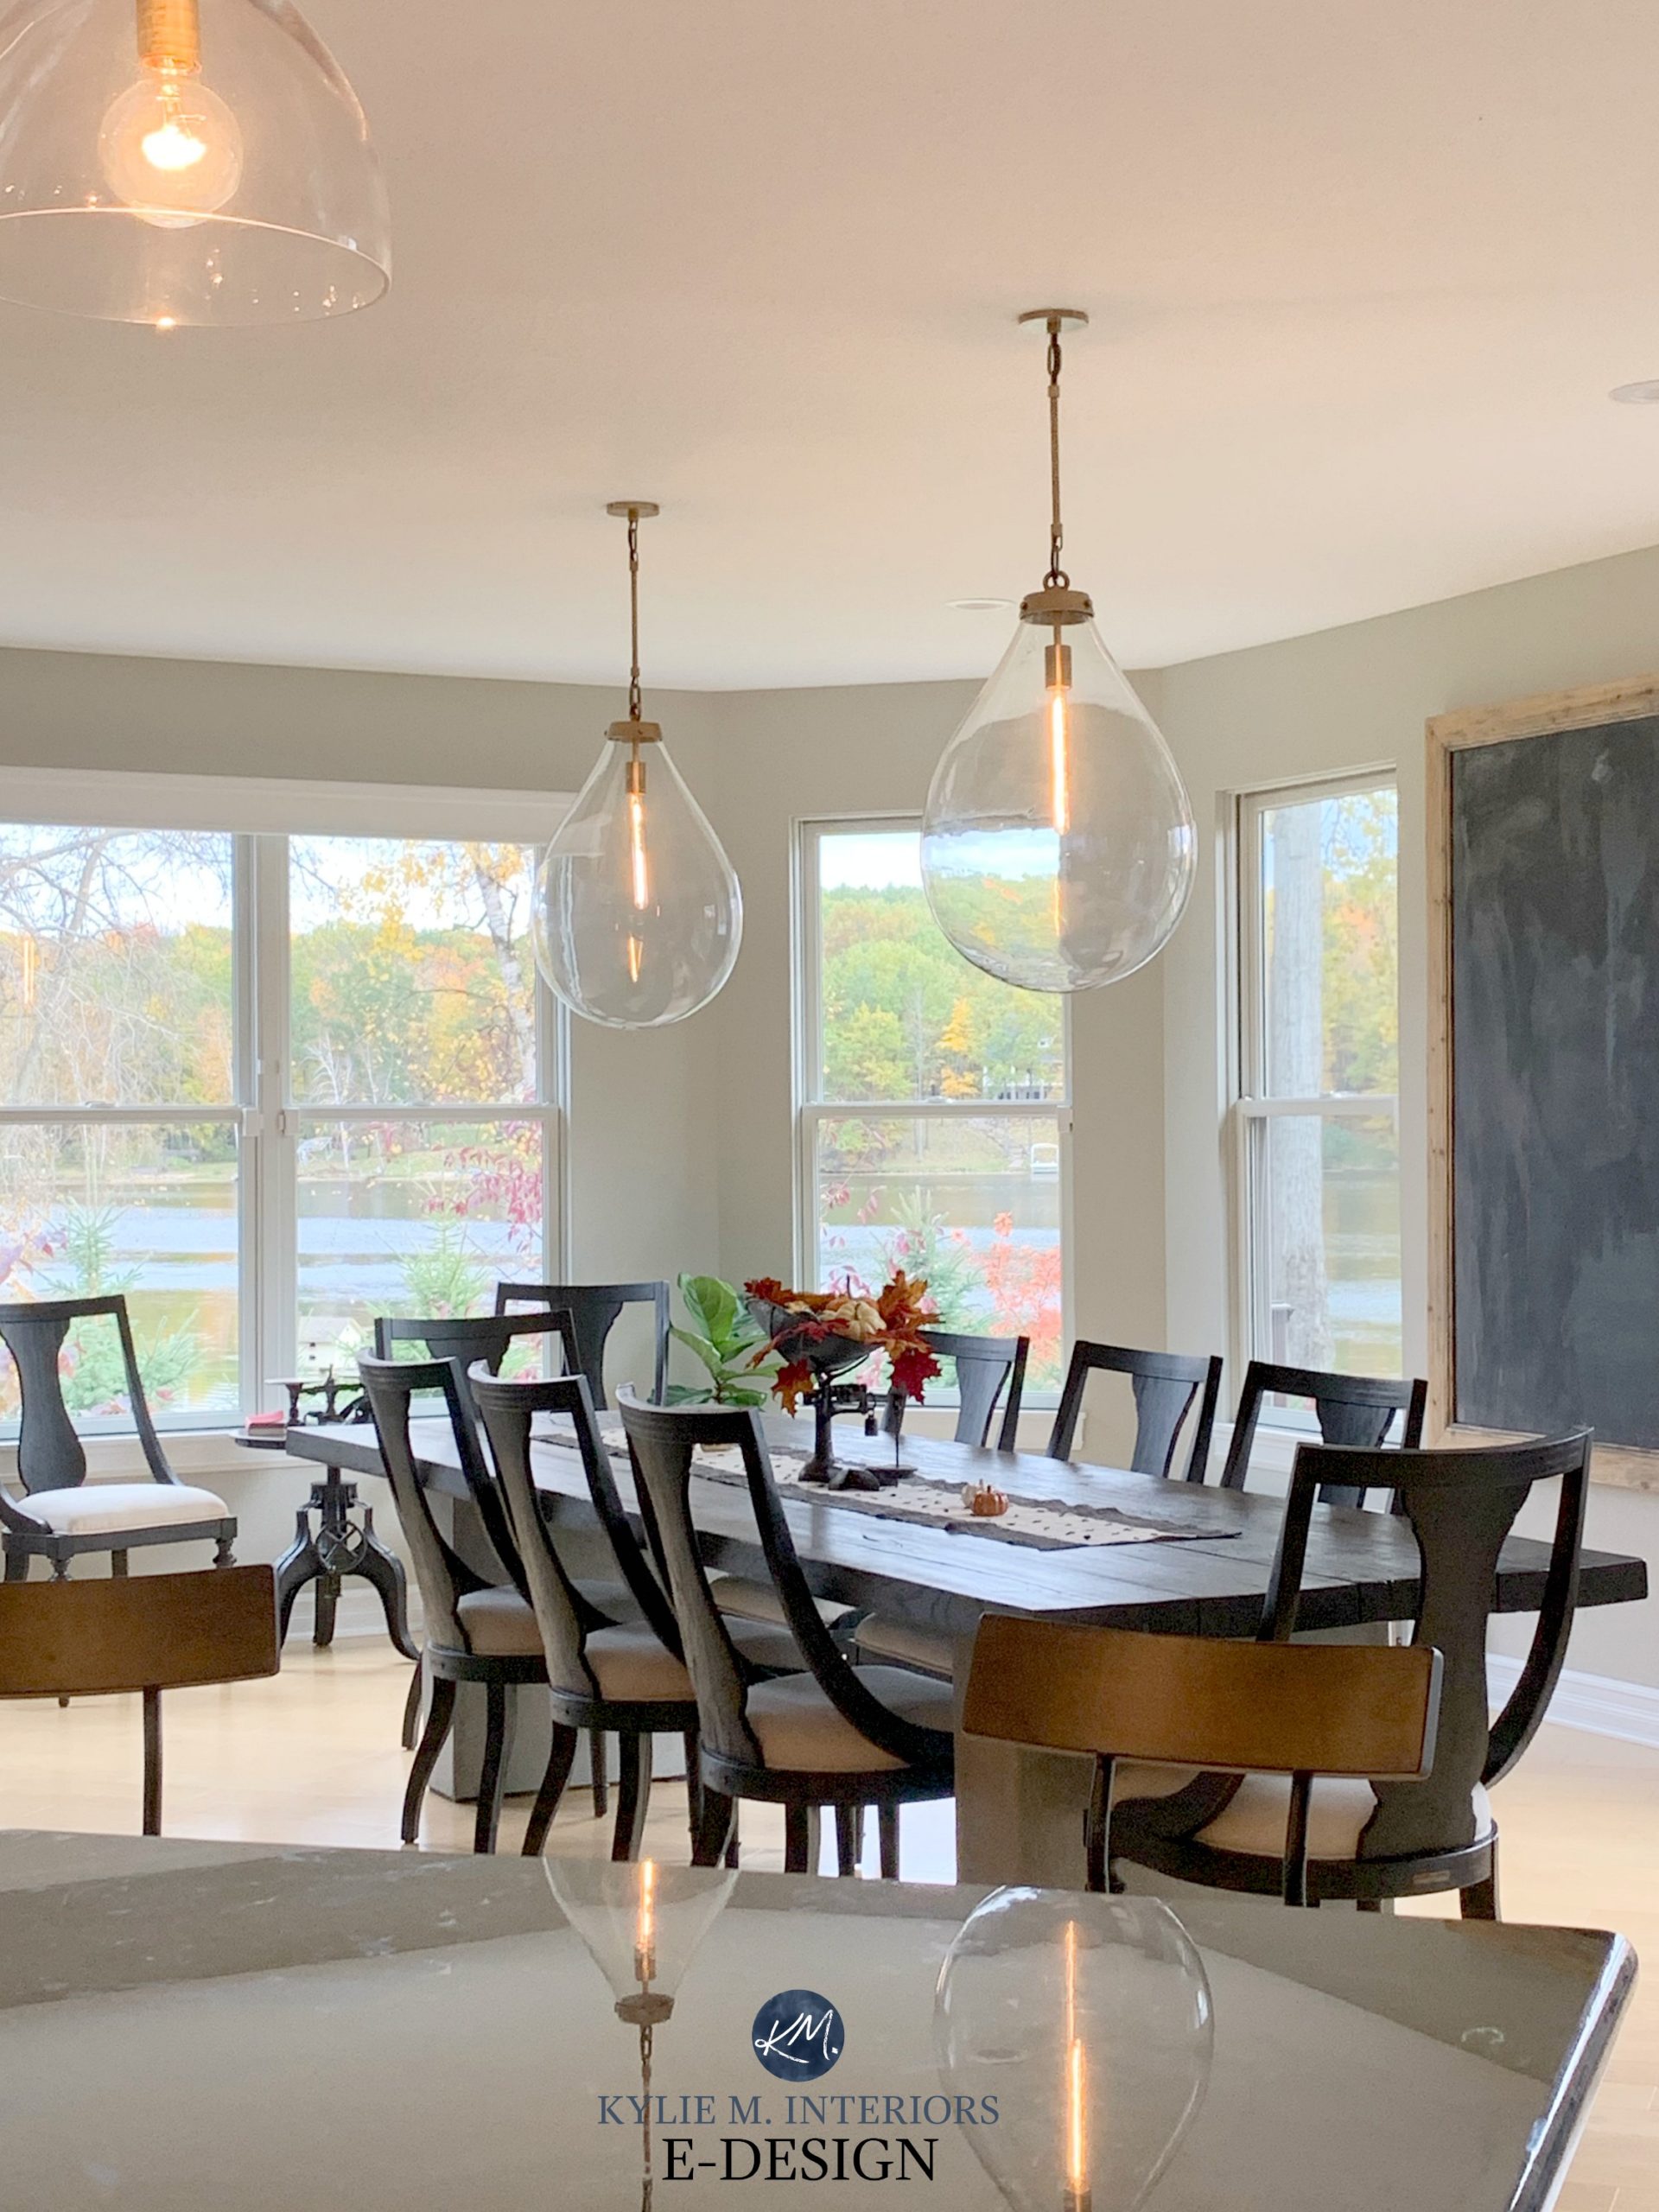 Benjamin Moore Revere Pewter In Dining Room With Dark Wood Furniture And Pendant Lights Best Warm Gray Kylie M Interiors Edesign Client Photo Decorating Blog,Three Bedroom Townhomes For Sale Near Me